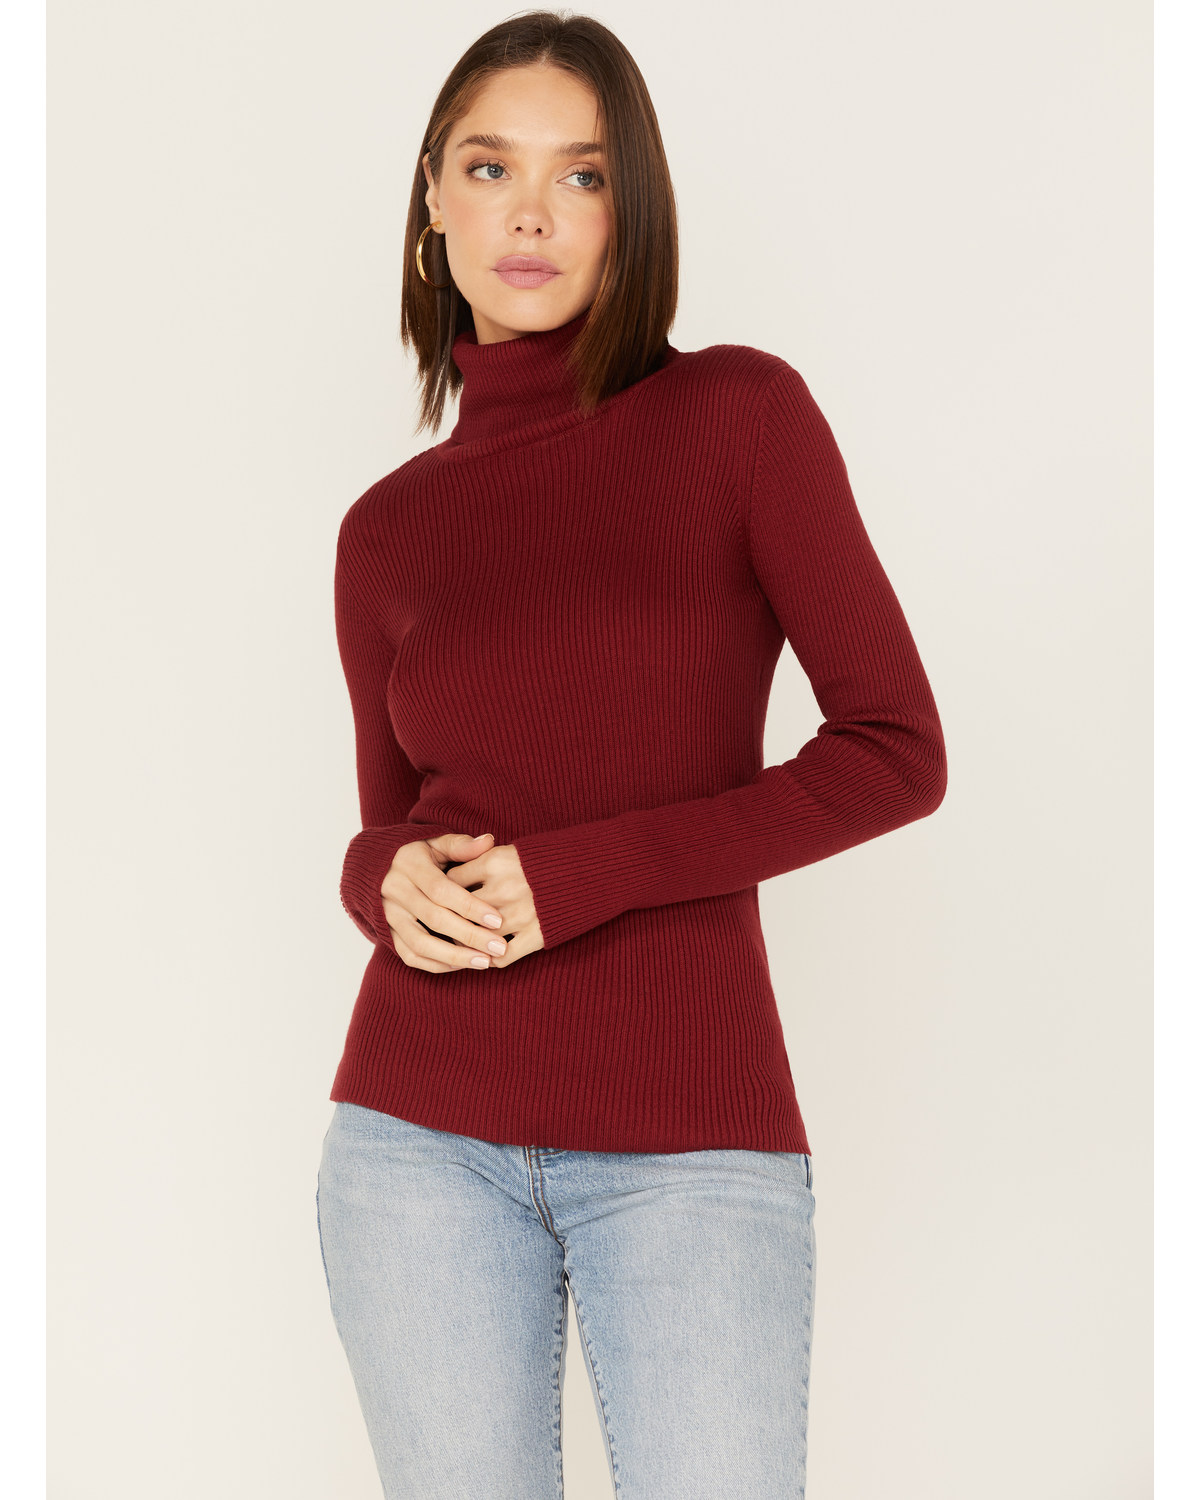 Cleo + Wolf Women's Ribbed Turtleneck Sweater